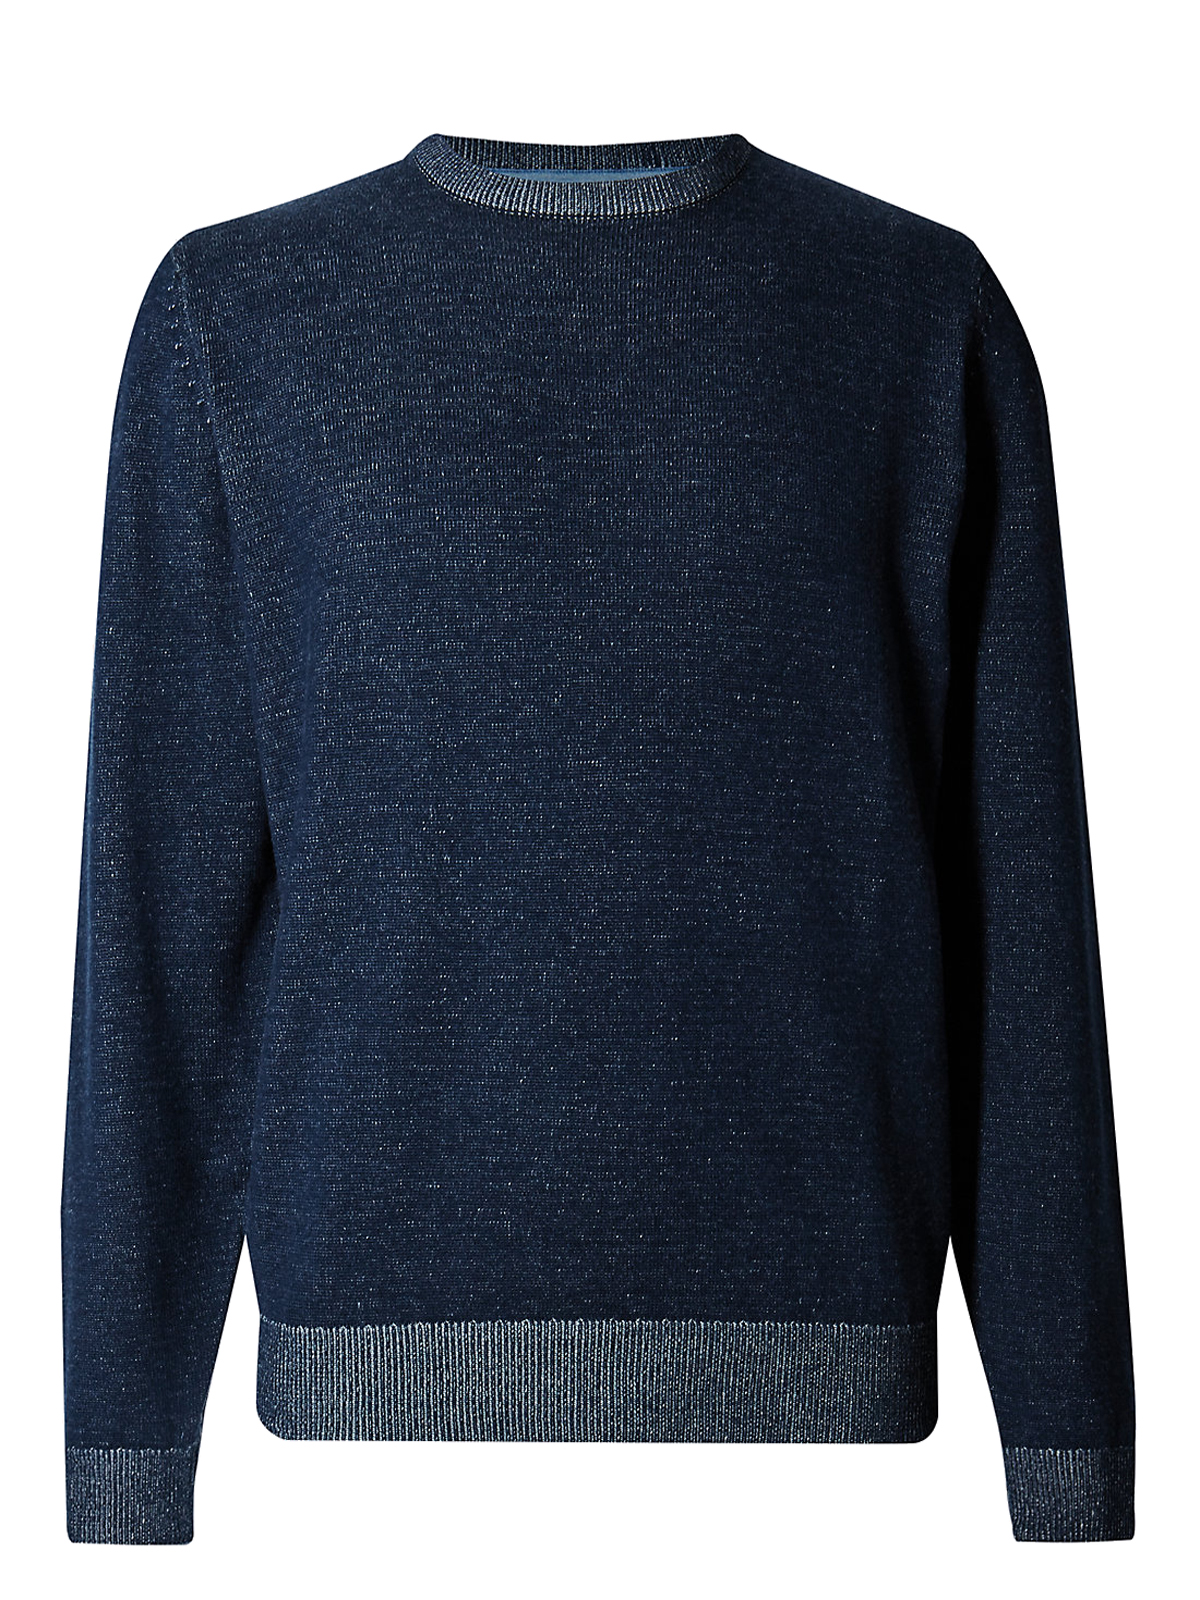 Marks and Spencer - - M&5 ASSORTED Mens Knitted Jumpers - Size Small to ...